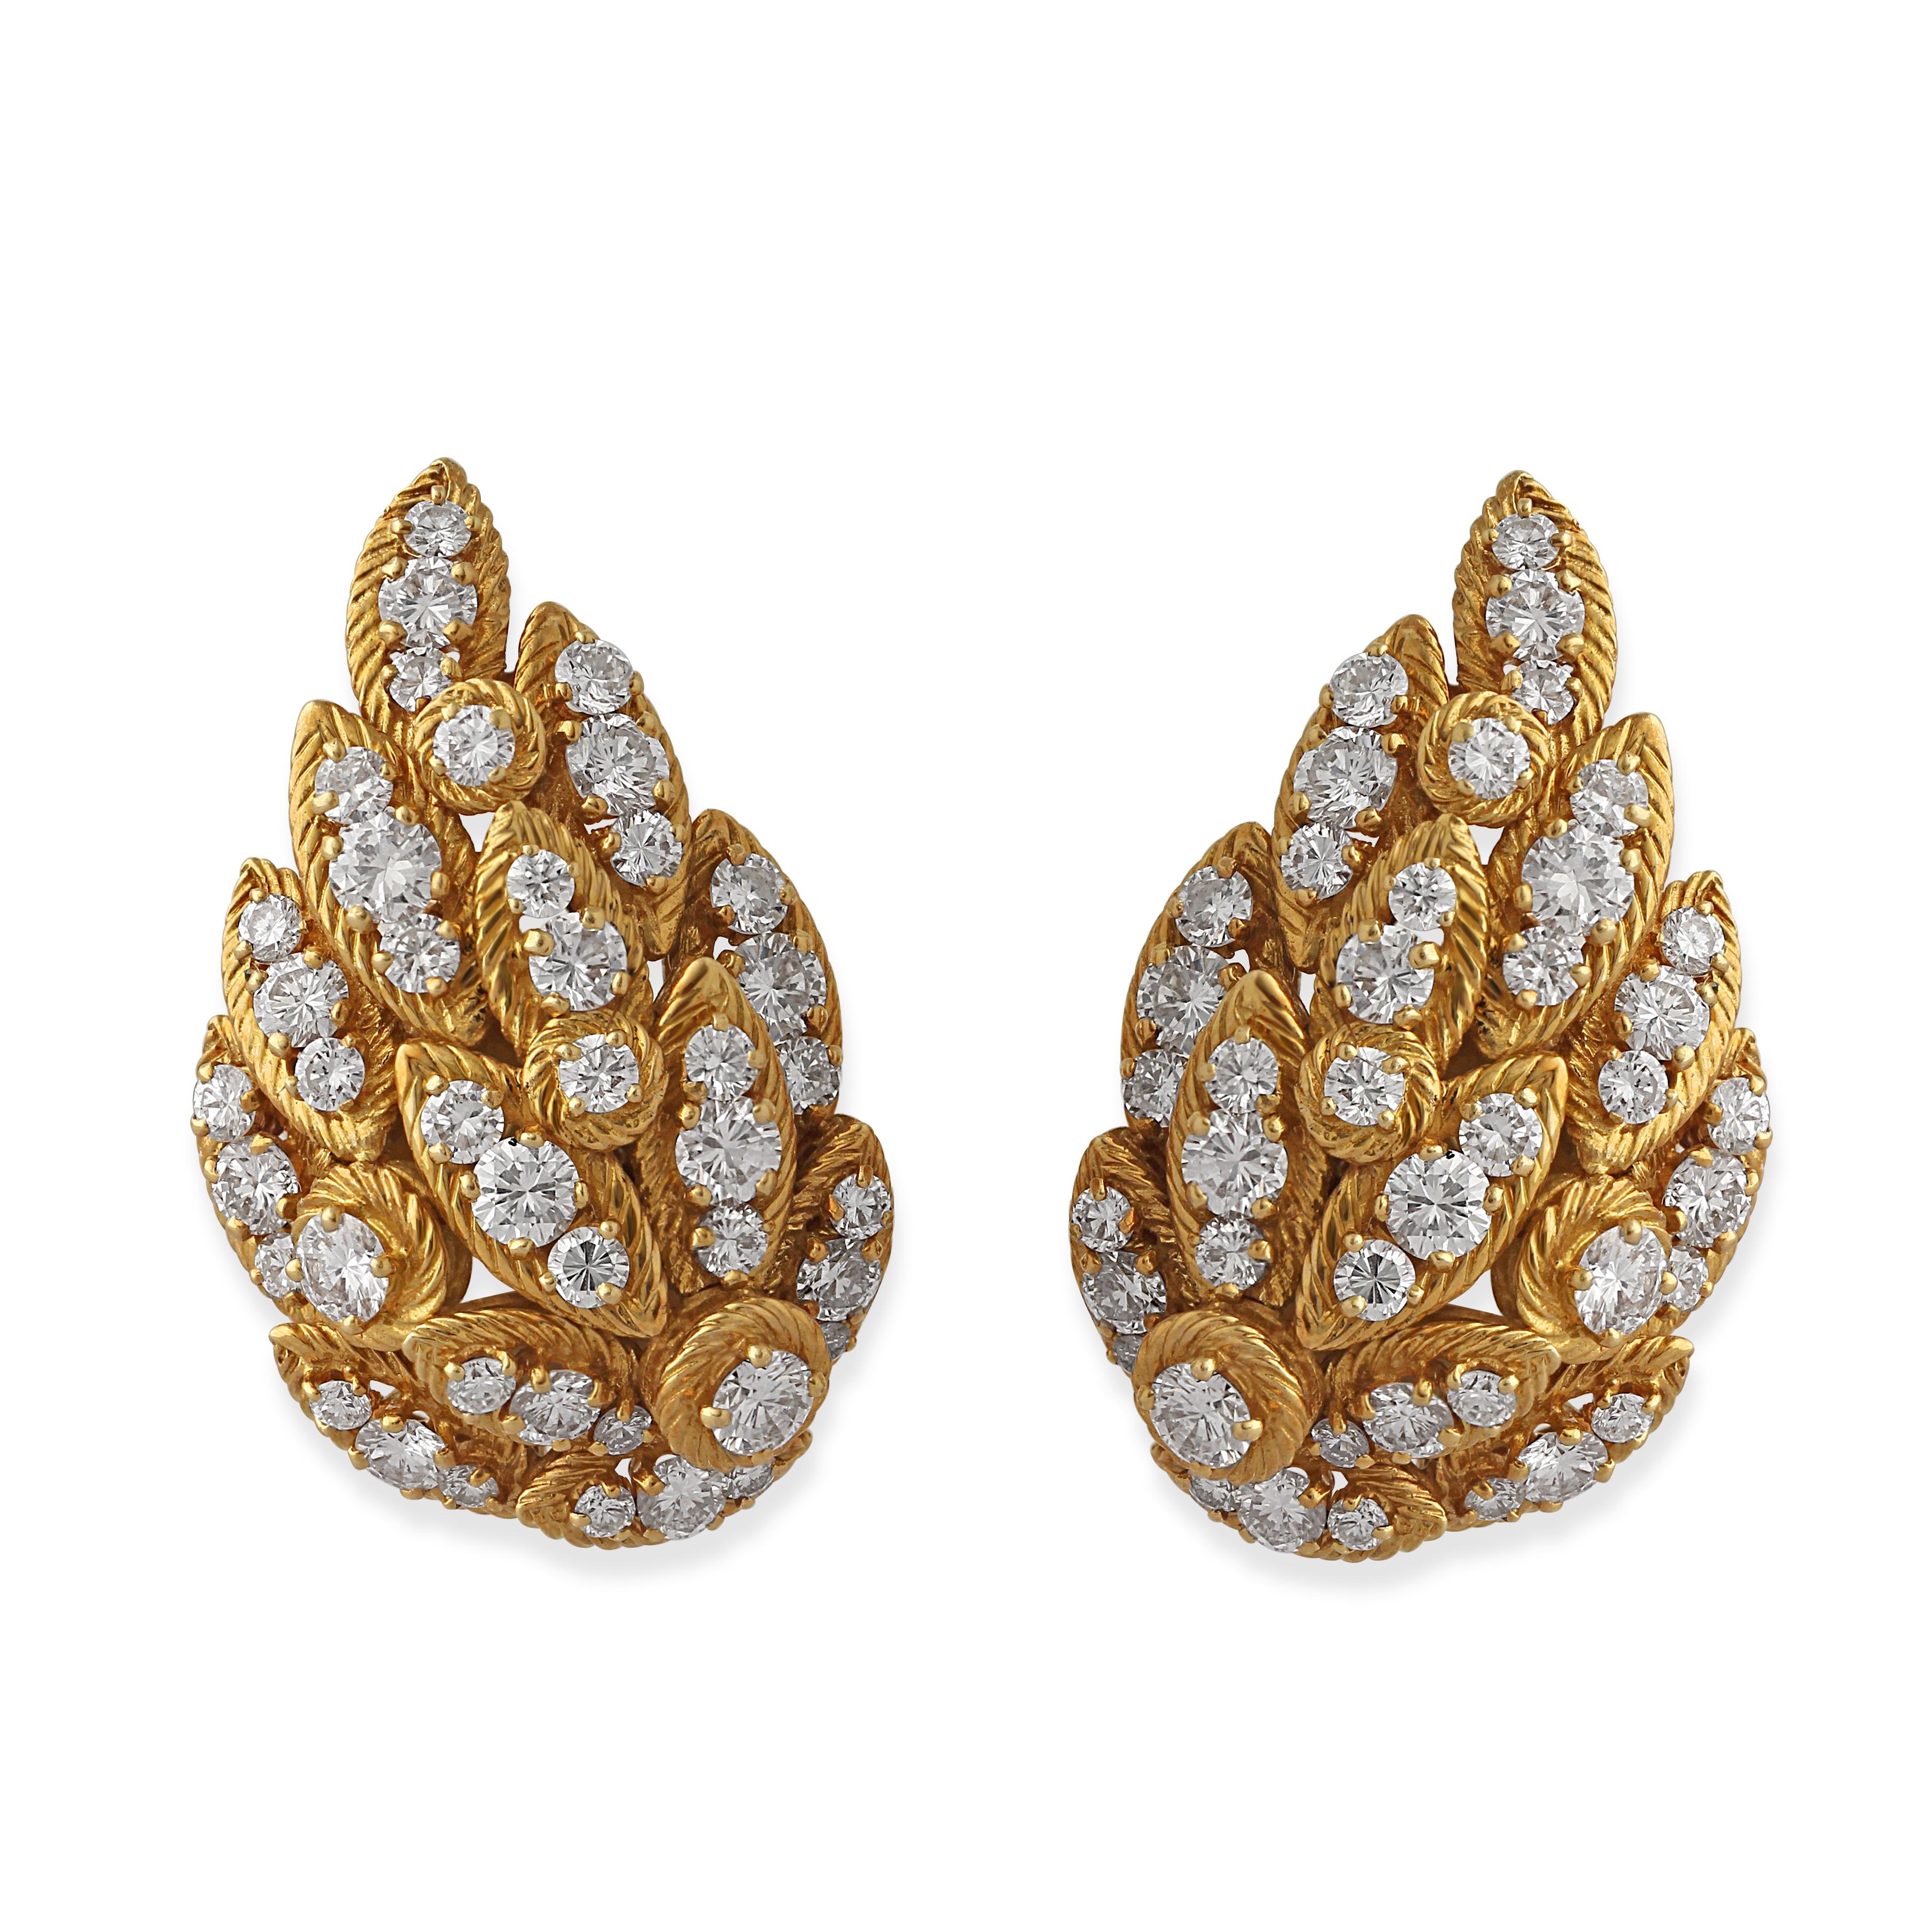 A pair of gold and diamond clip earrings made by Georges Lenfant for Van Cleef & Arpels designed as leaves in textured 18k yellow gold with diamonds. Circa 1970s. Weight = 29.20gr.

Georges Lenfant was an exceptionally skilled jeweller who produced